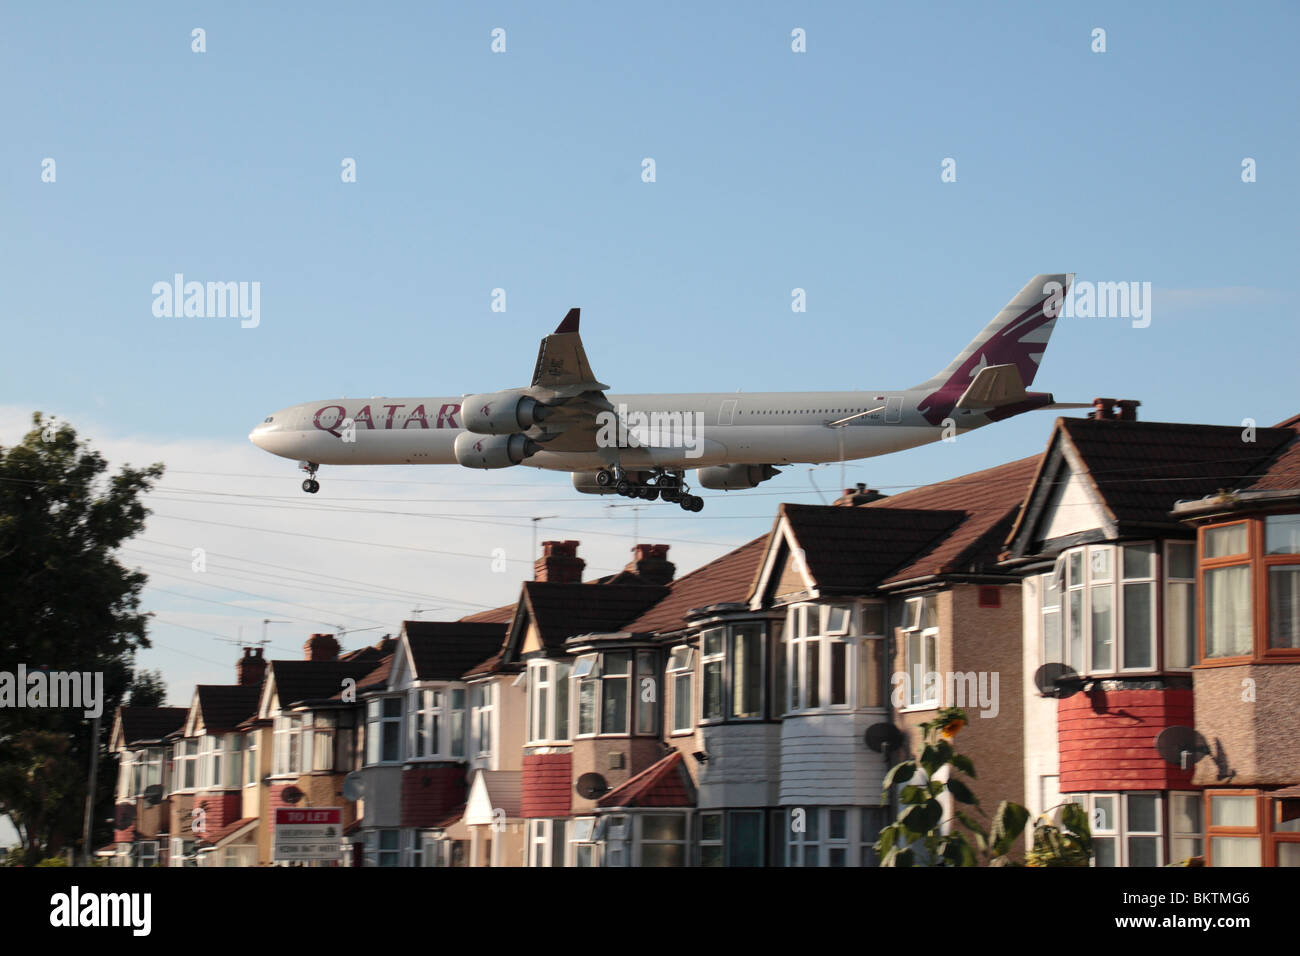 A Qatar Airbus A340-642 landing at Heathrow Airport, London, UK. View from Myrtle Avenue, Hounslow. (A7-AGC) Stock Photo